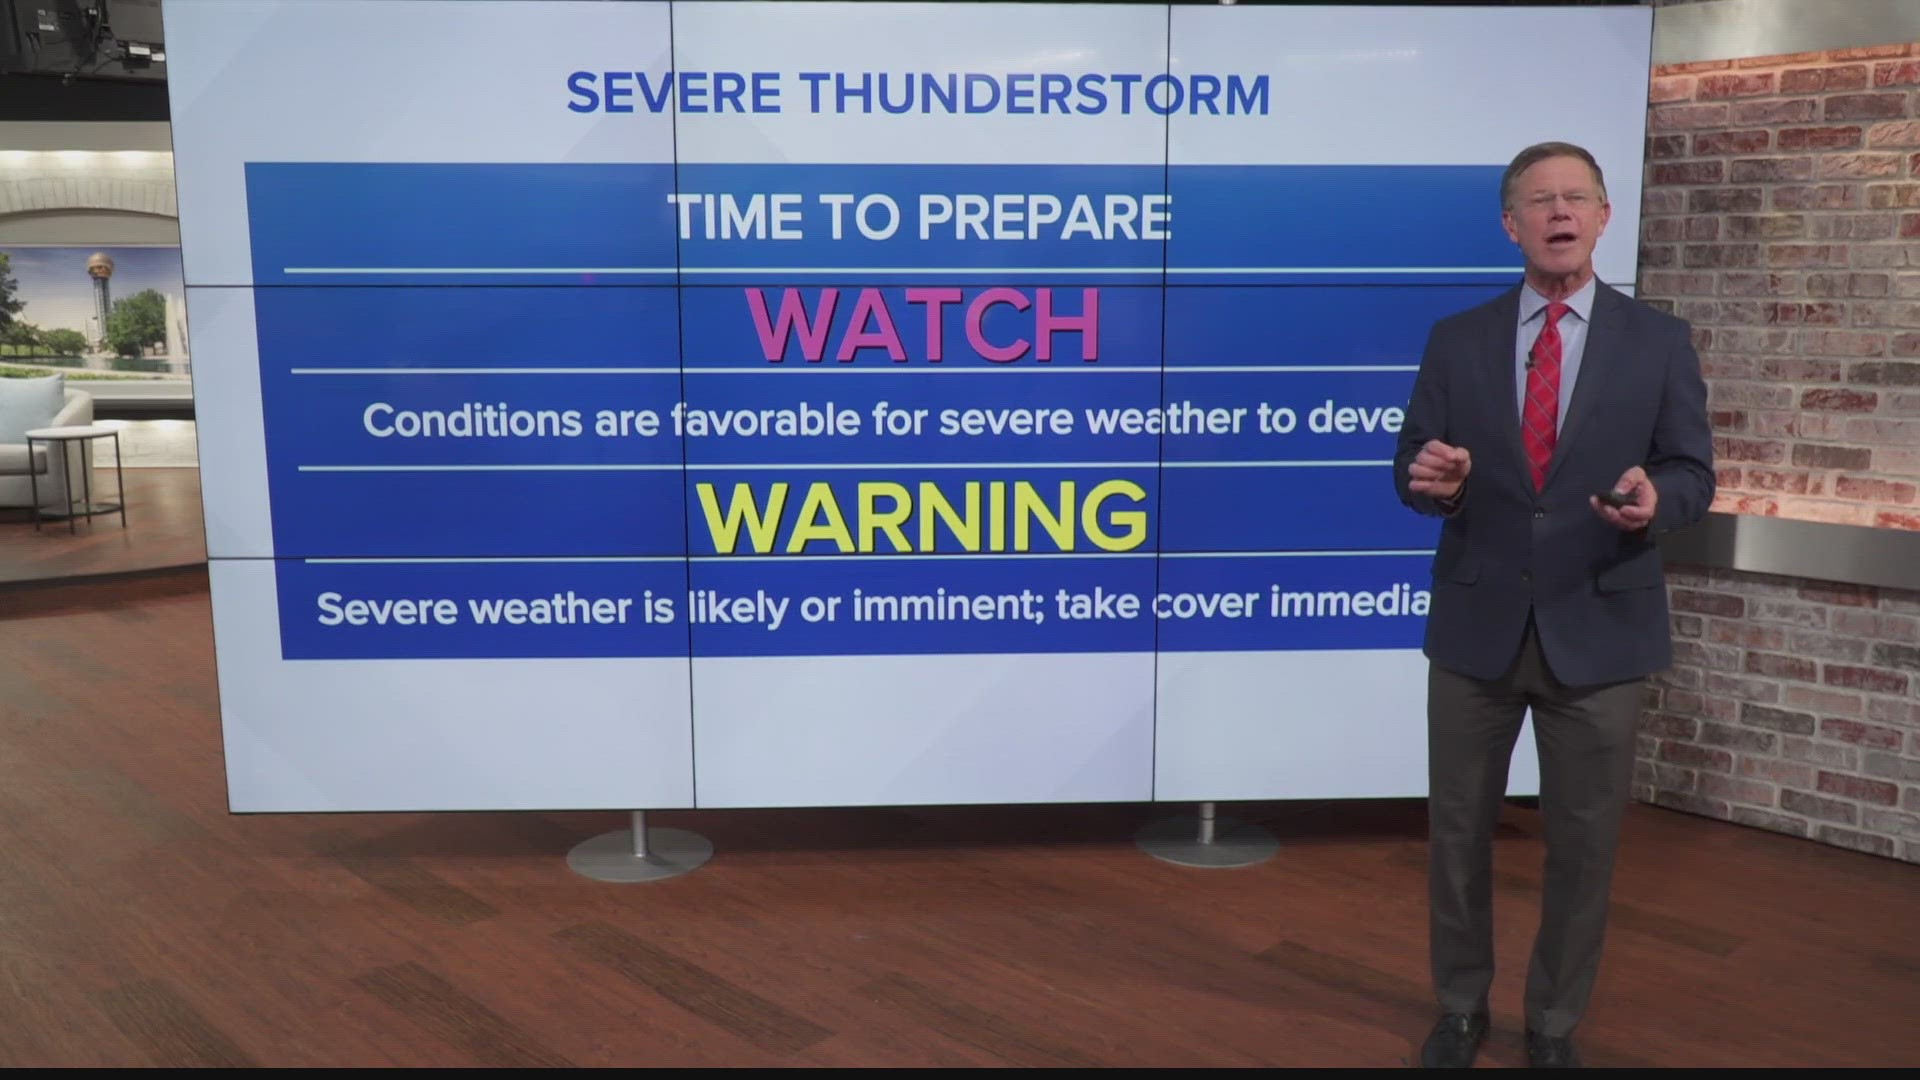 Here's how to stay safe during a thunderstorm!